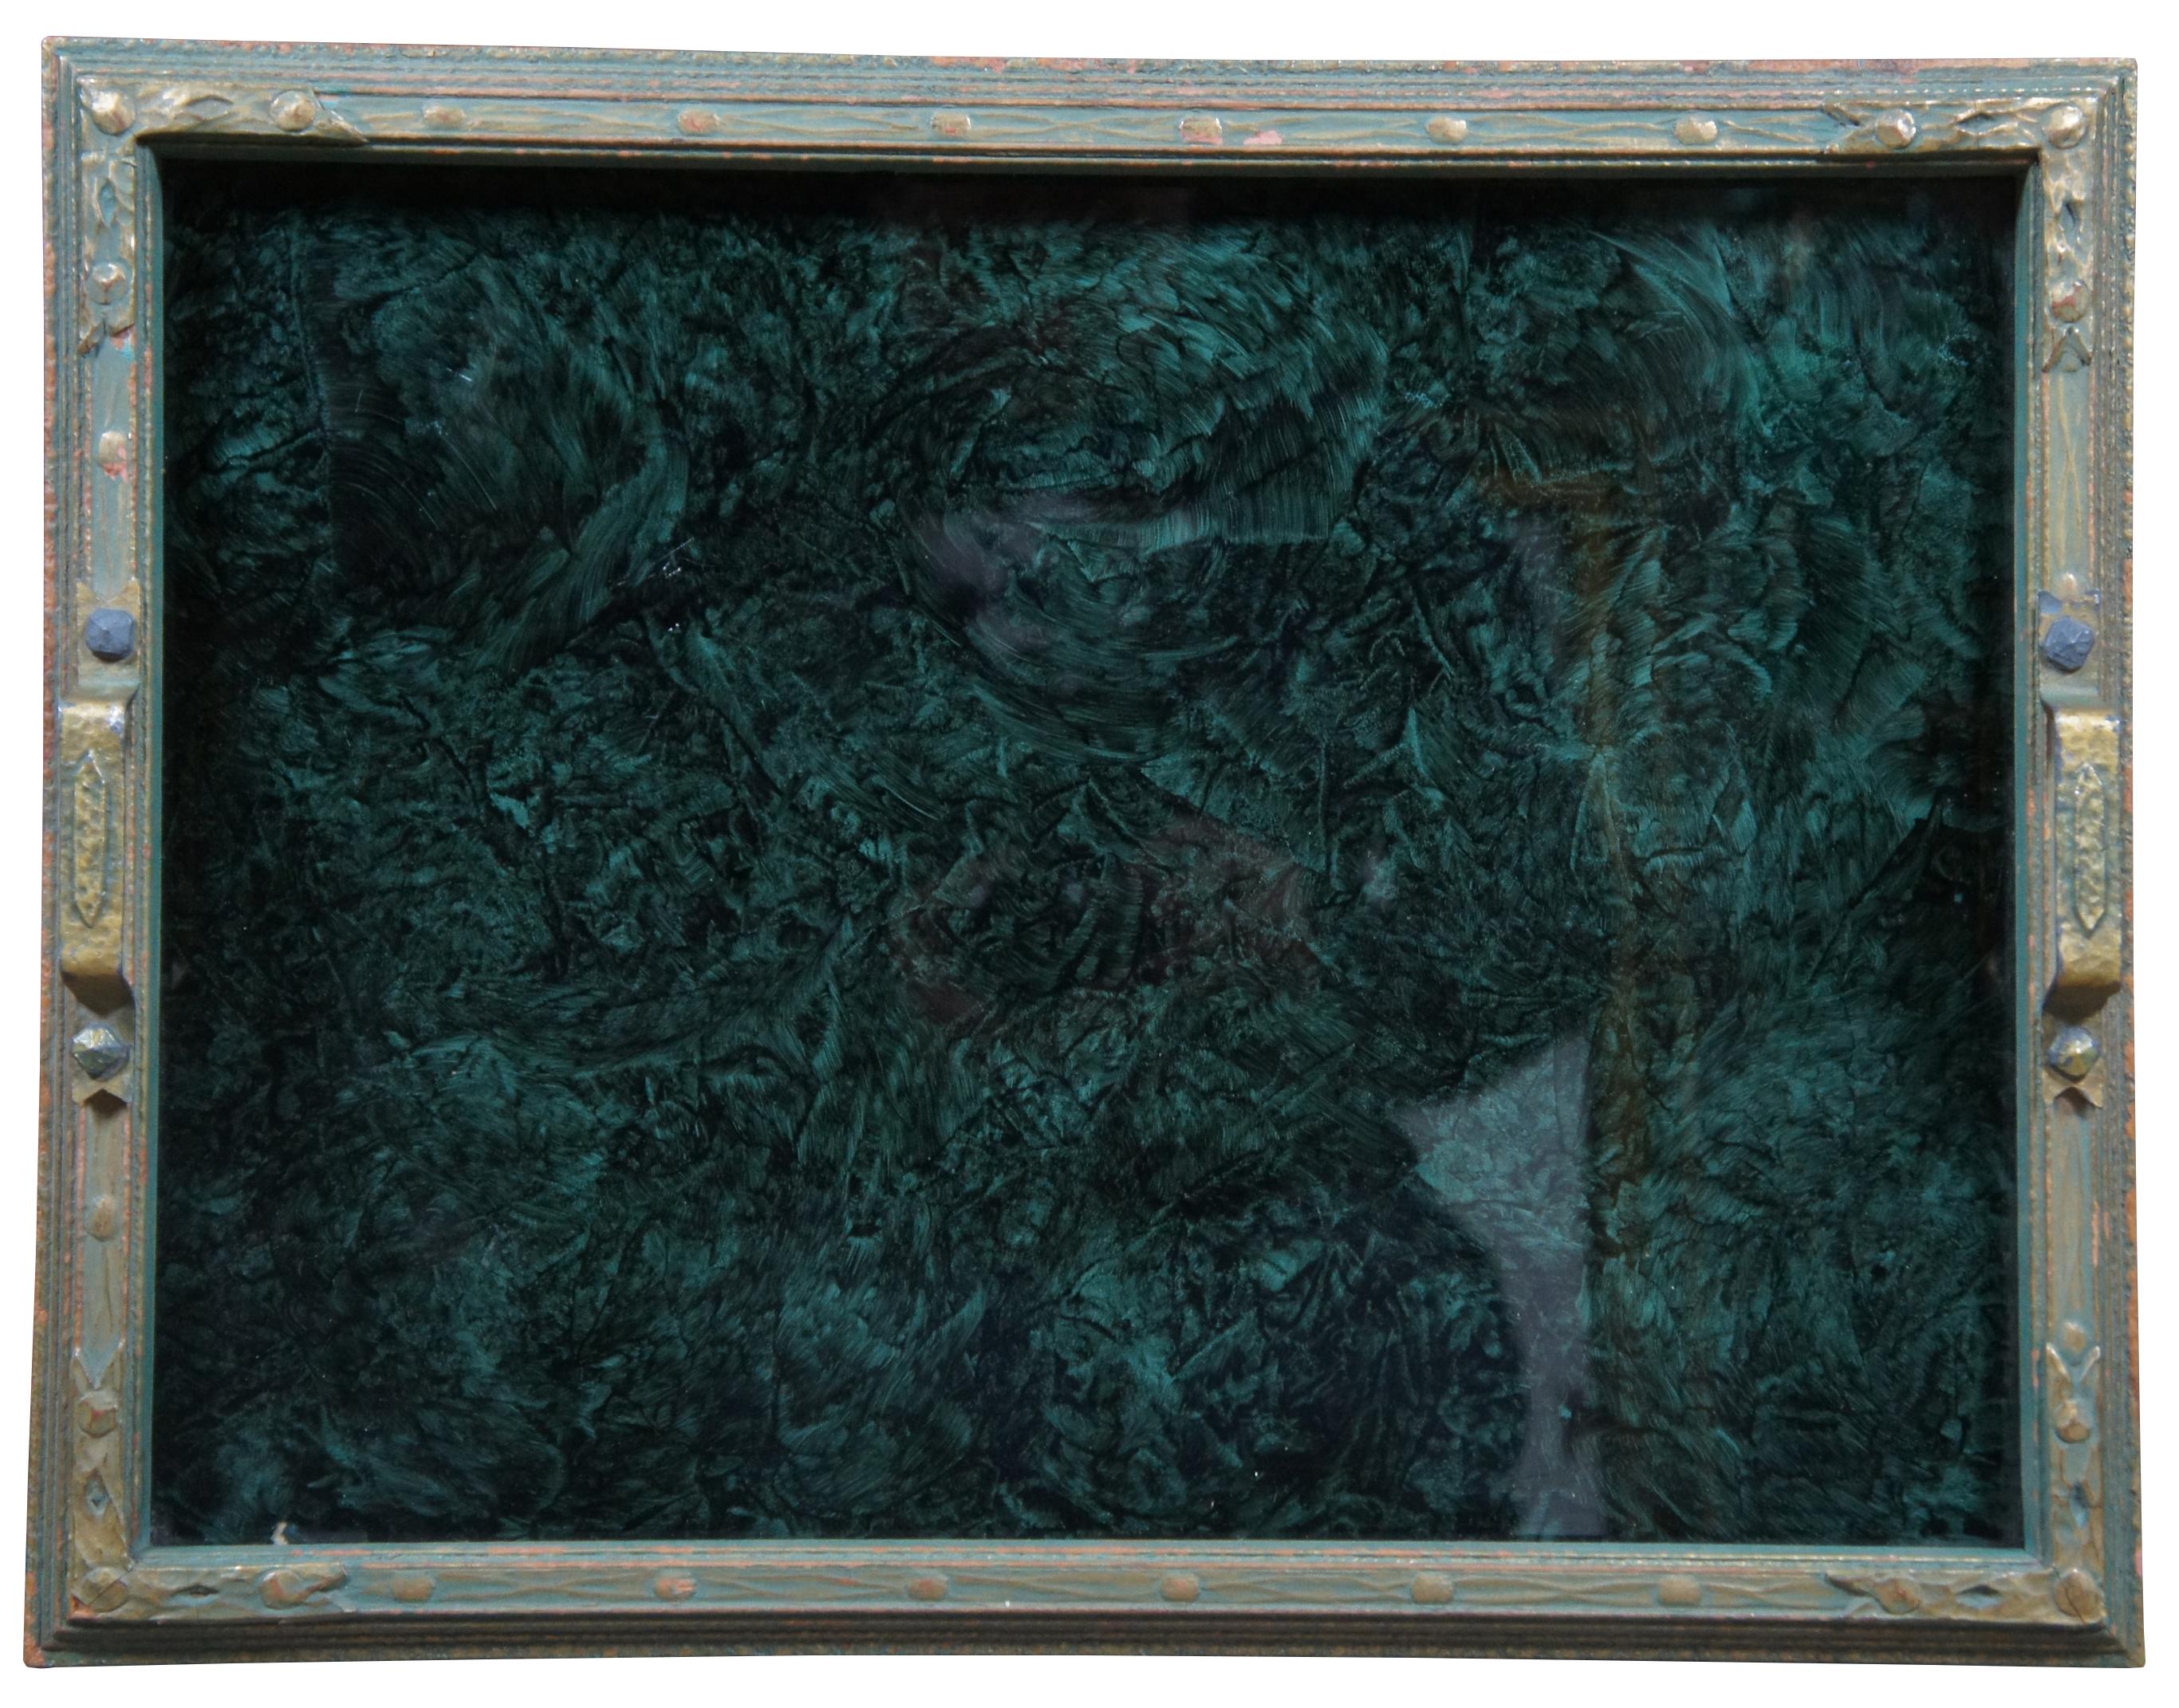 Antique vanity or serving tray with a carved and painted wood frame, brass handles and glass over a green and black marbled surface. Produced by Pieces of 8, trademarked 1926. Measures: 17